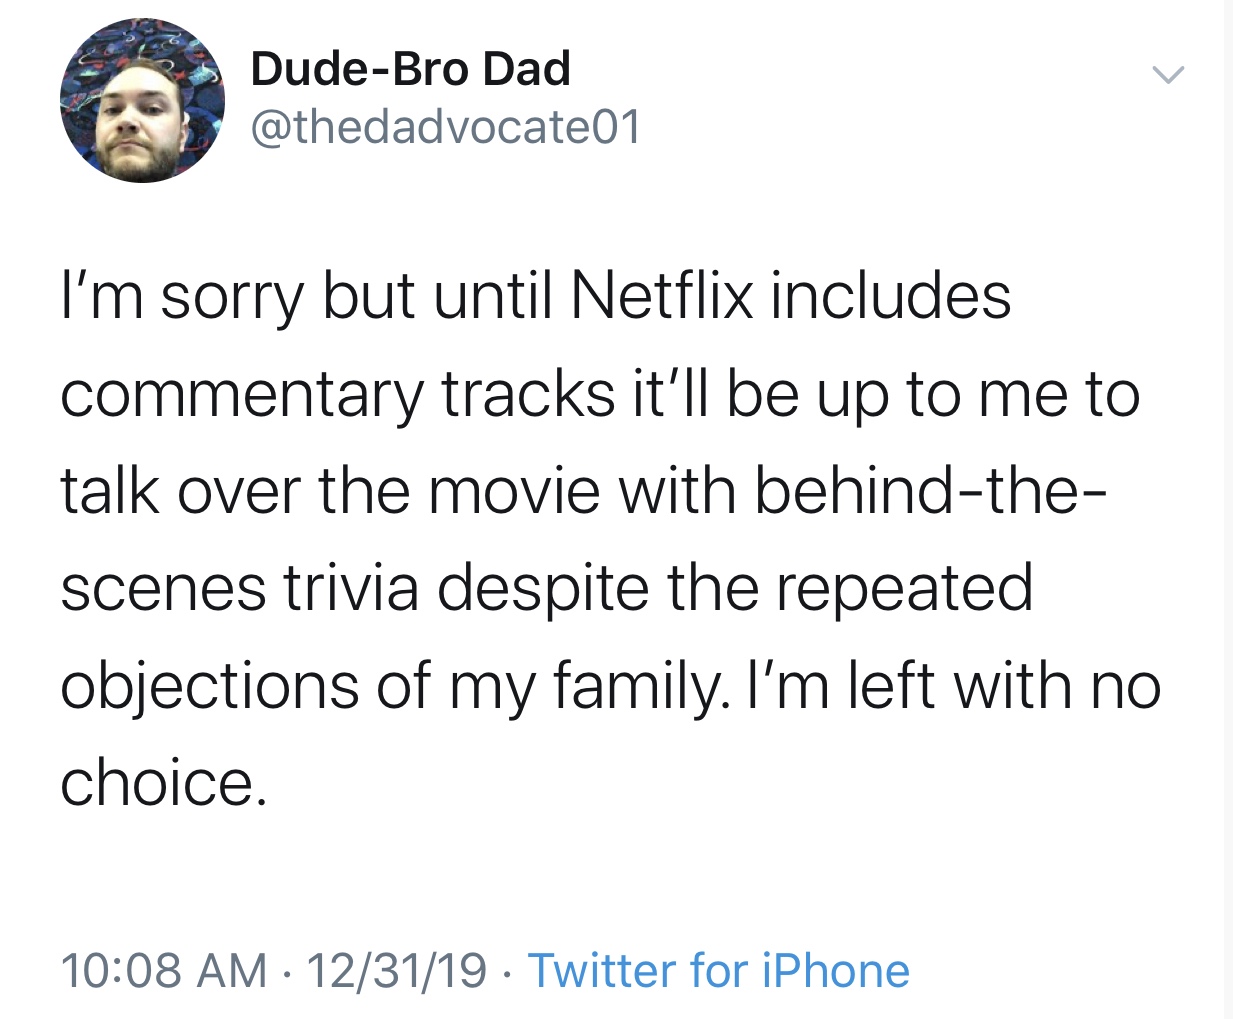 justin murphy twitter greta - DudeBro Dad I'm sorry but until Netflix includes commentary tracks it'll be up to me to talk over the movie with behindthe scenes trivia despite the repeated objections of my family. I'm left with no choice. 123119 Twitter fo